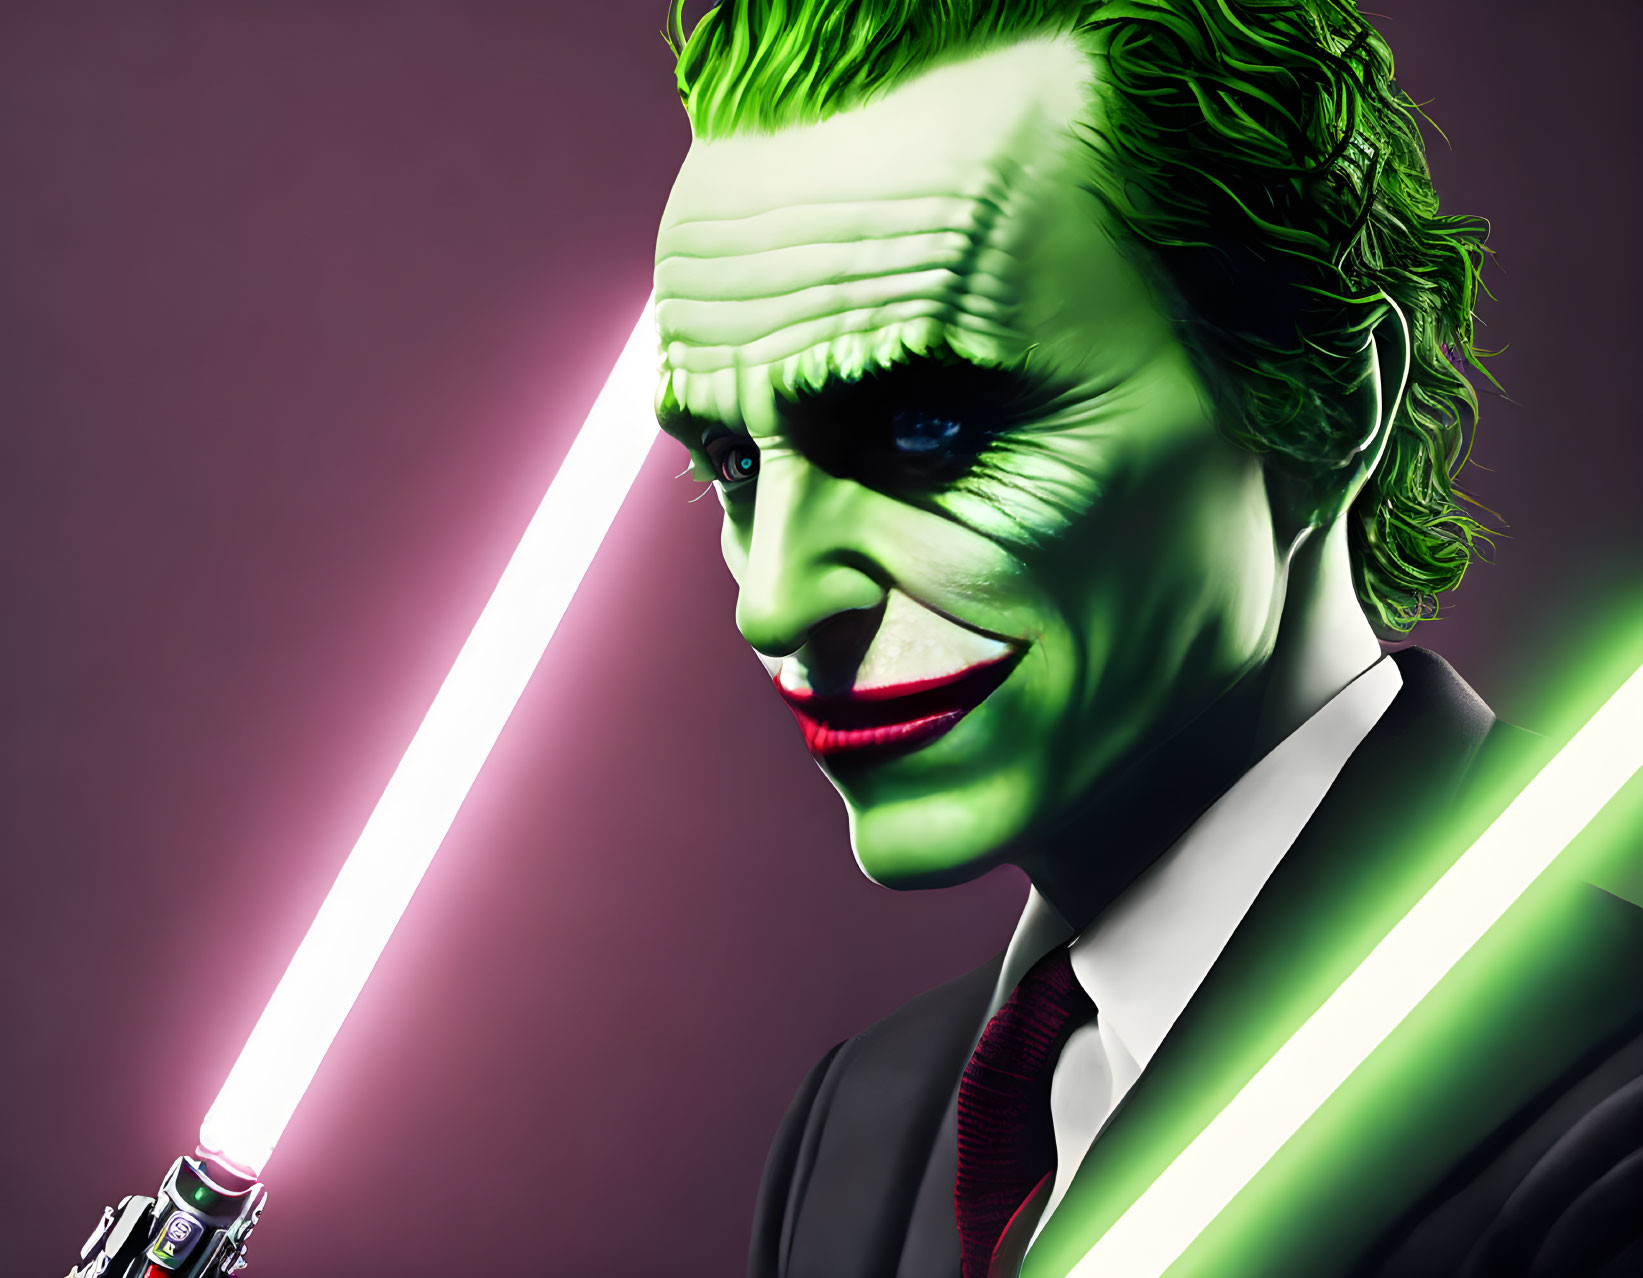 The Joker with Light-sabers